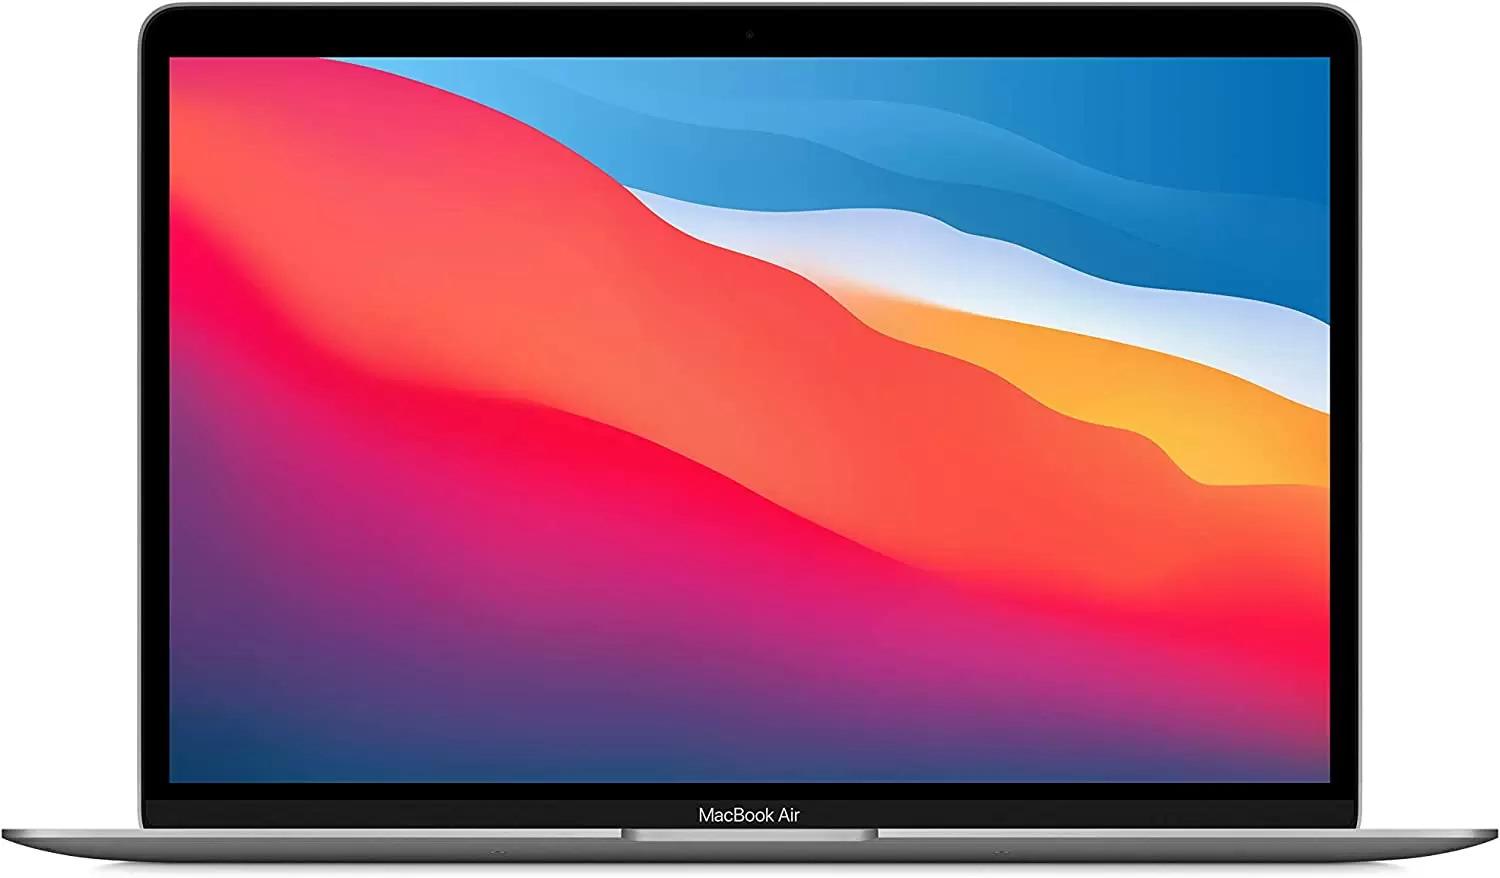 Apple MacBook Air 13.3in M1 8GB 256GB SSD Notebook Laptop for $799.99 Shipped